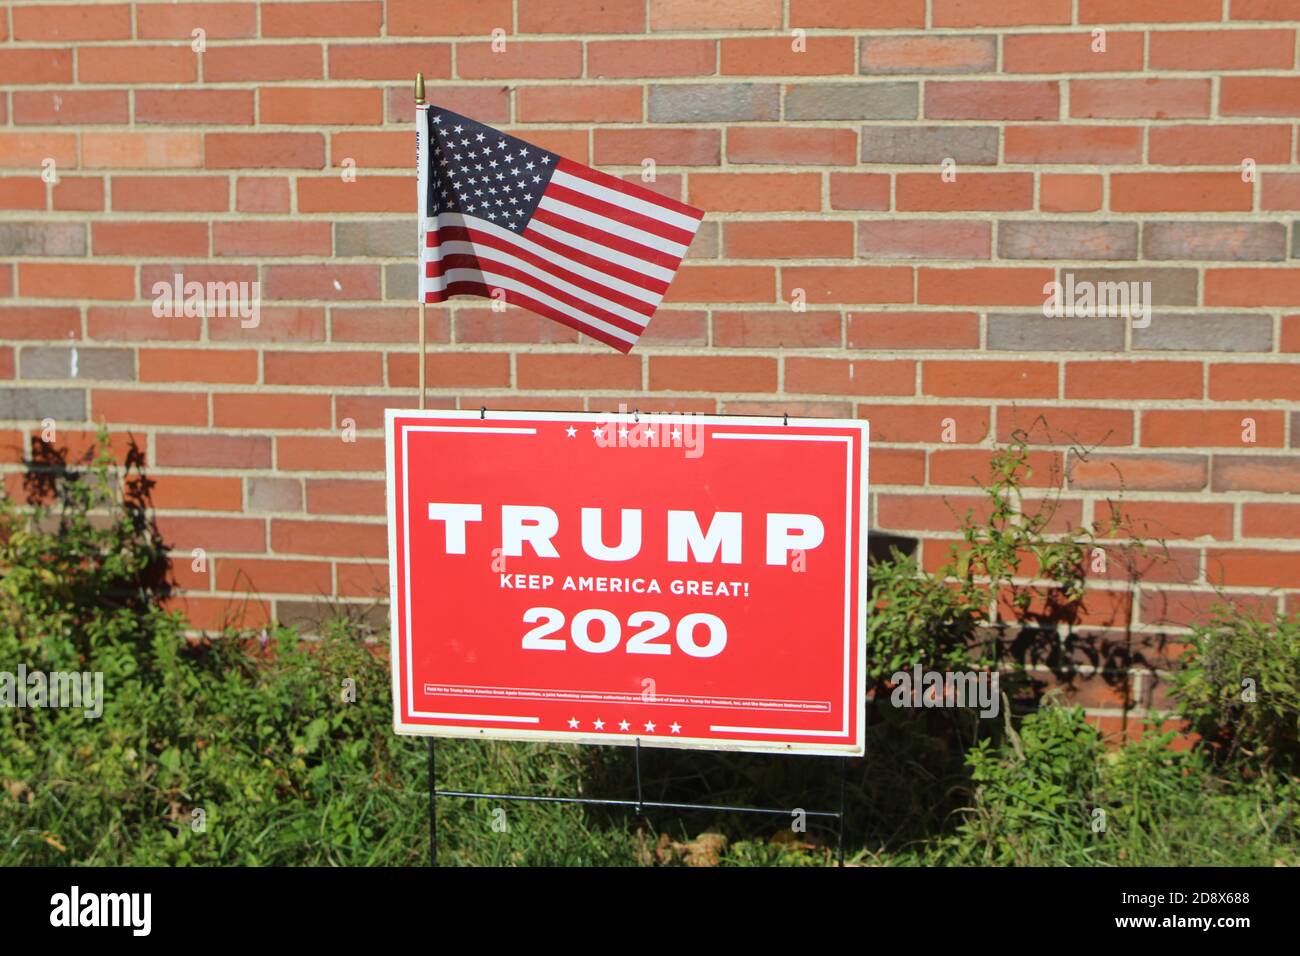 Trump Keep America Great 2020 with US flag in Morton Grove, Illinois Stock Photo